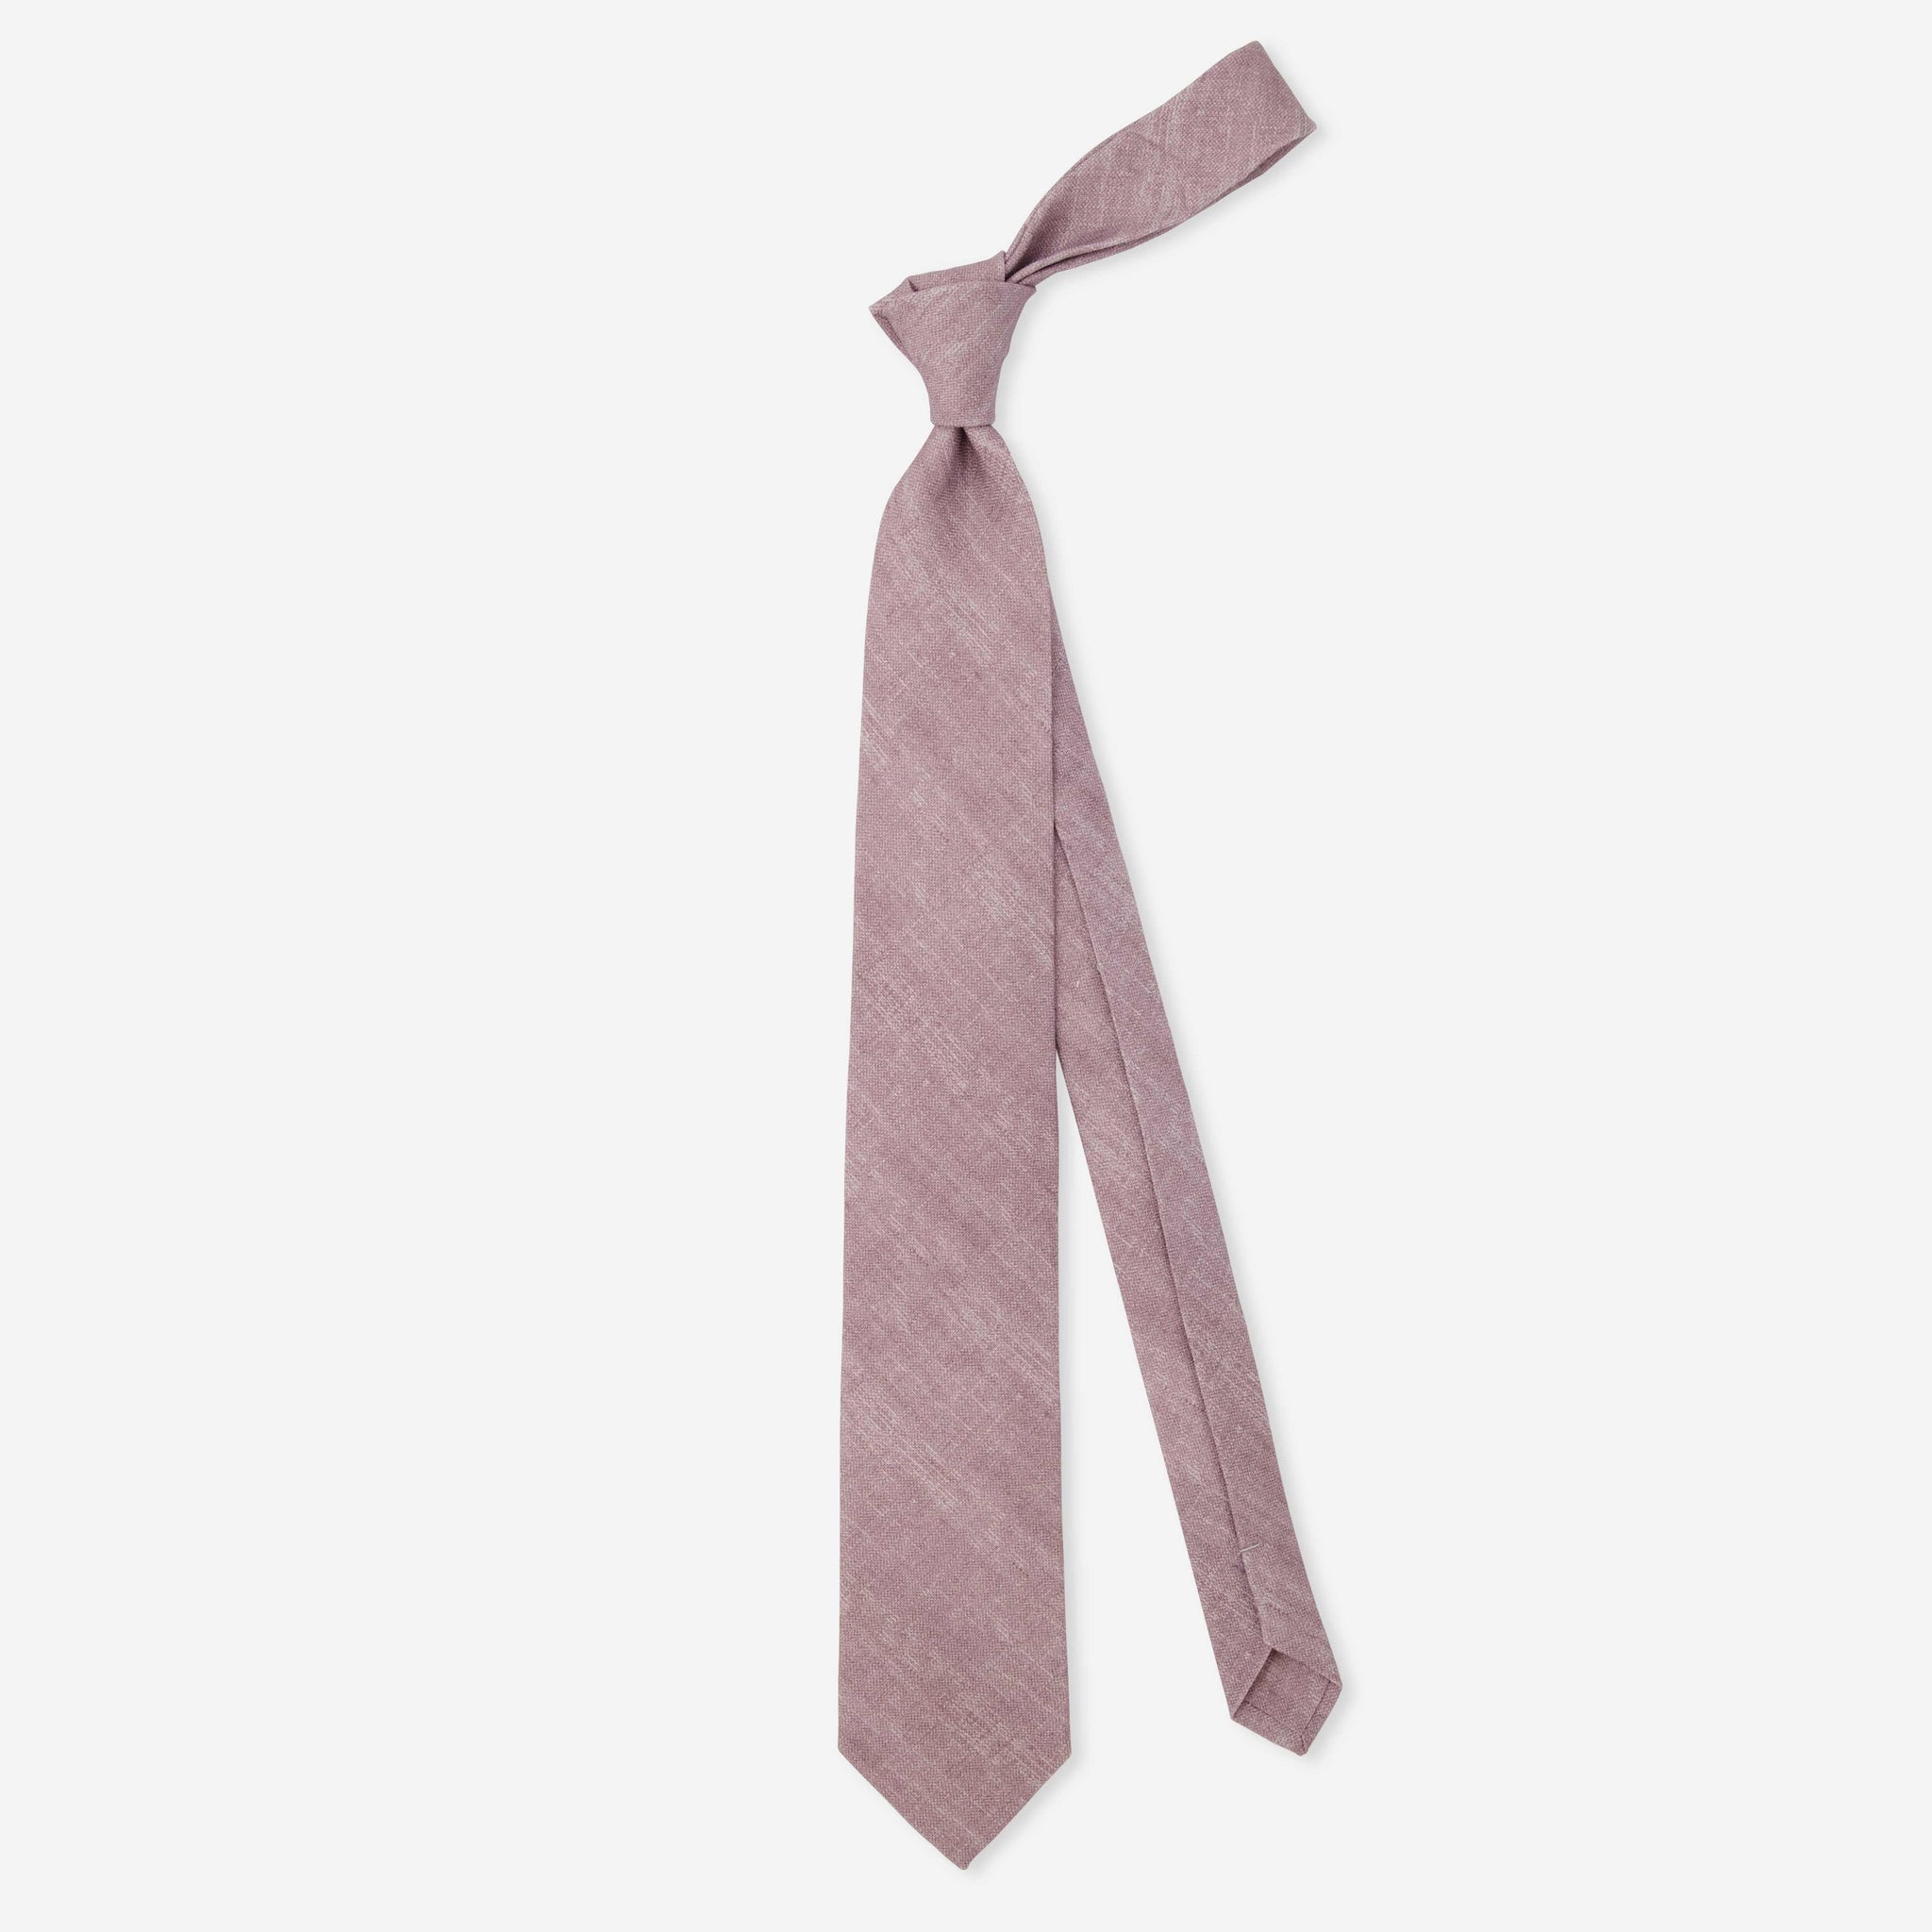 Soulmate Solid Mauve Tie by Tie Bar